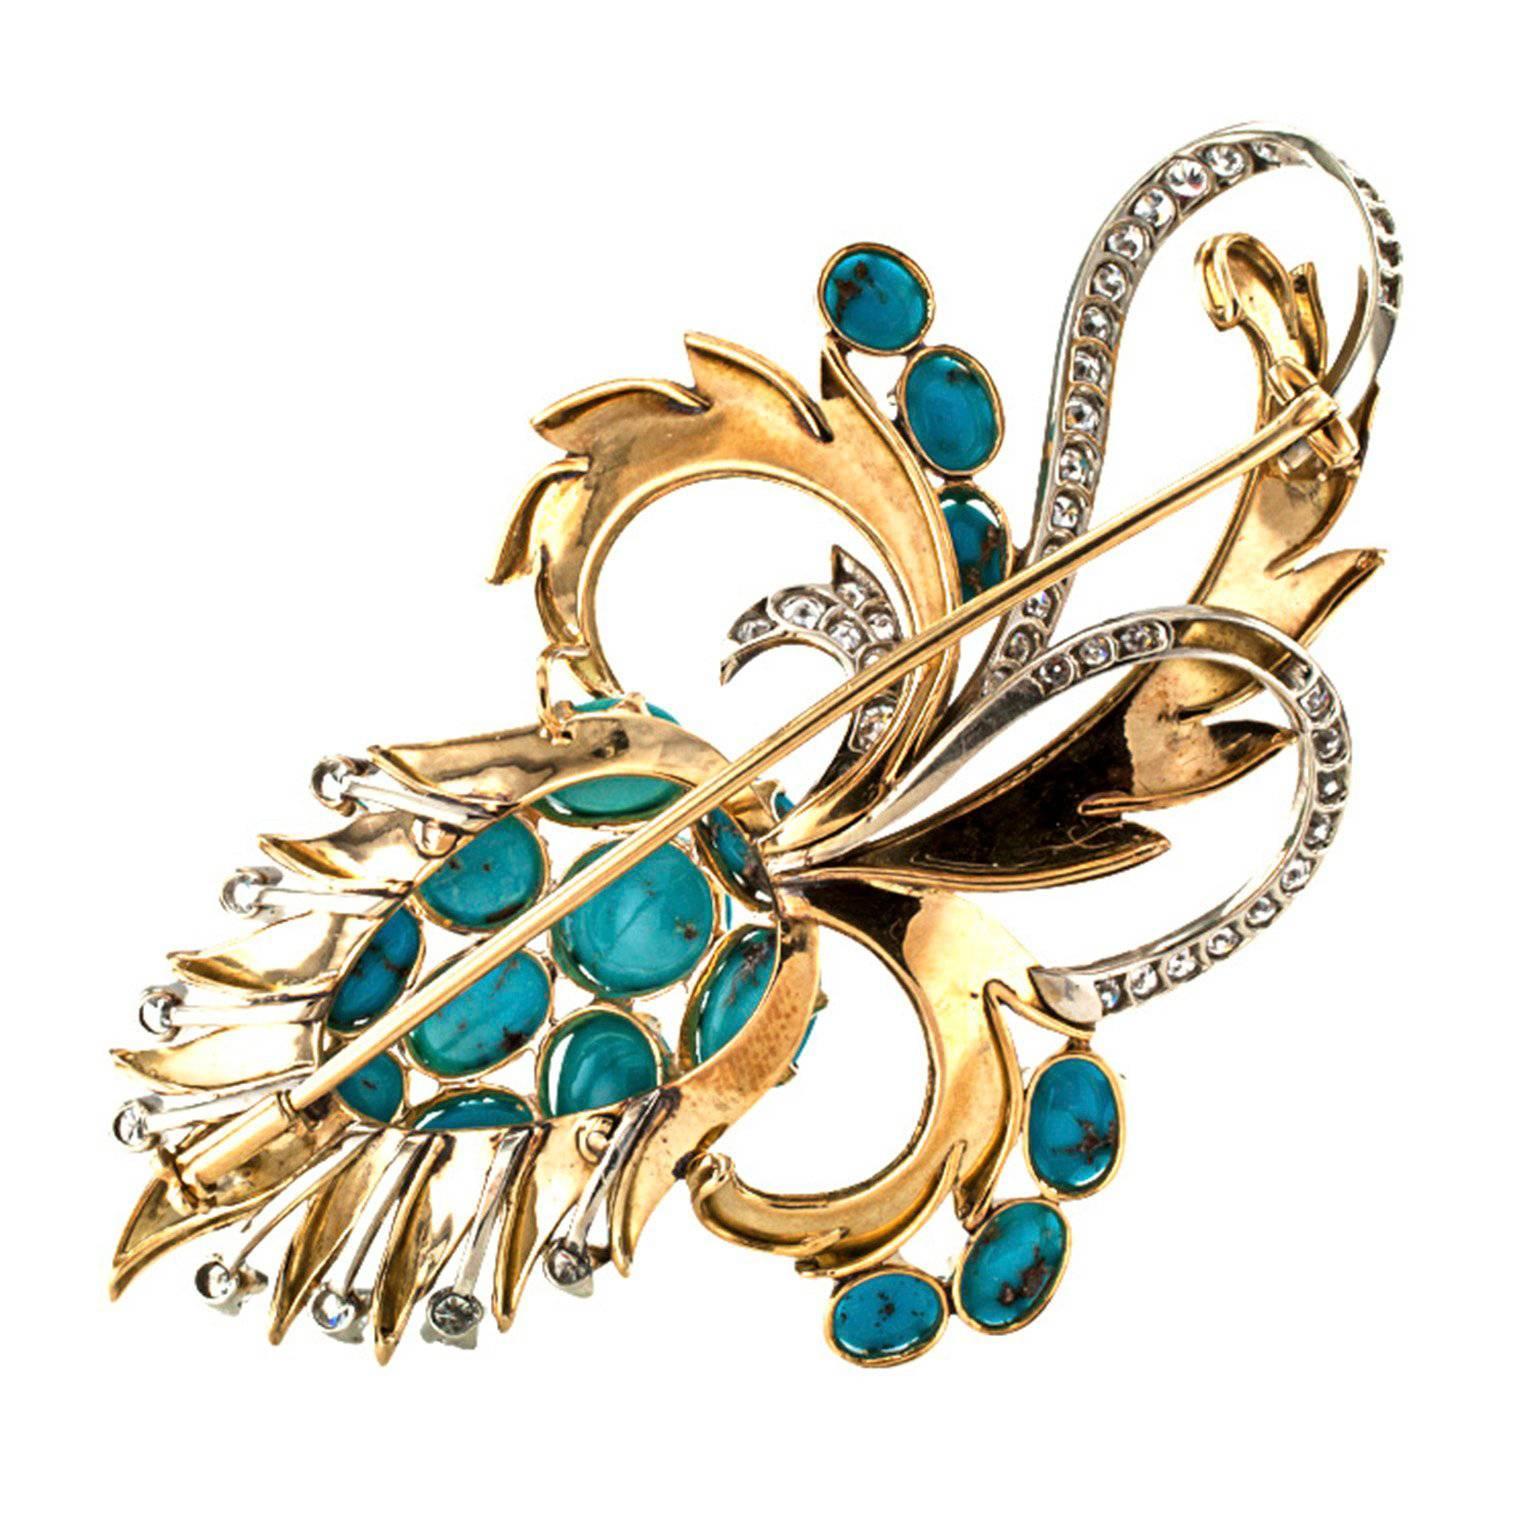 Turquoise and Diamond Abstract Brooch Circa 1960

This is kind of like dreaming in color... movement and grace... the jewelry designer's imagination set free and allowed to crystallize into shapes that are expressive and delightful to the eye...